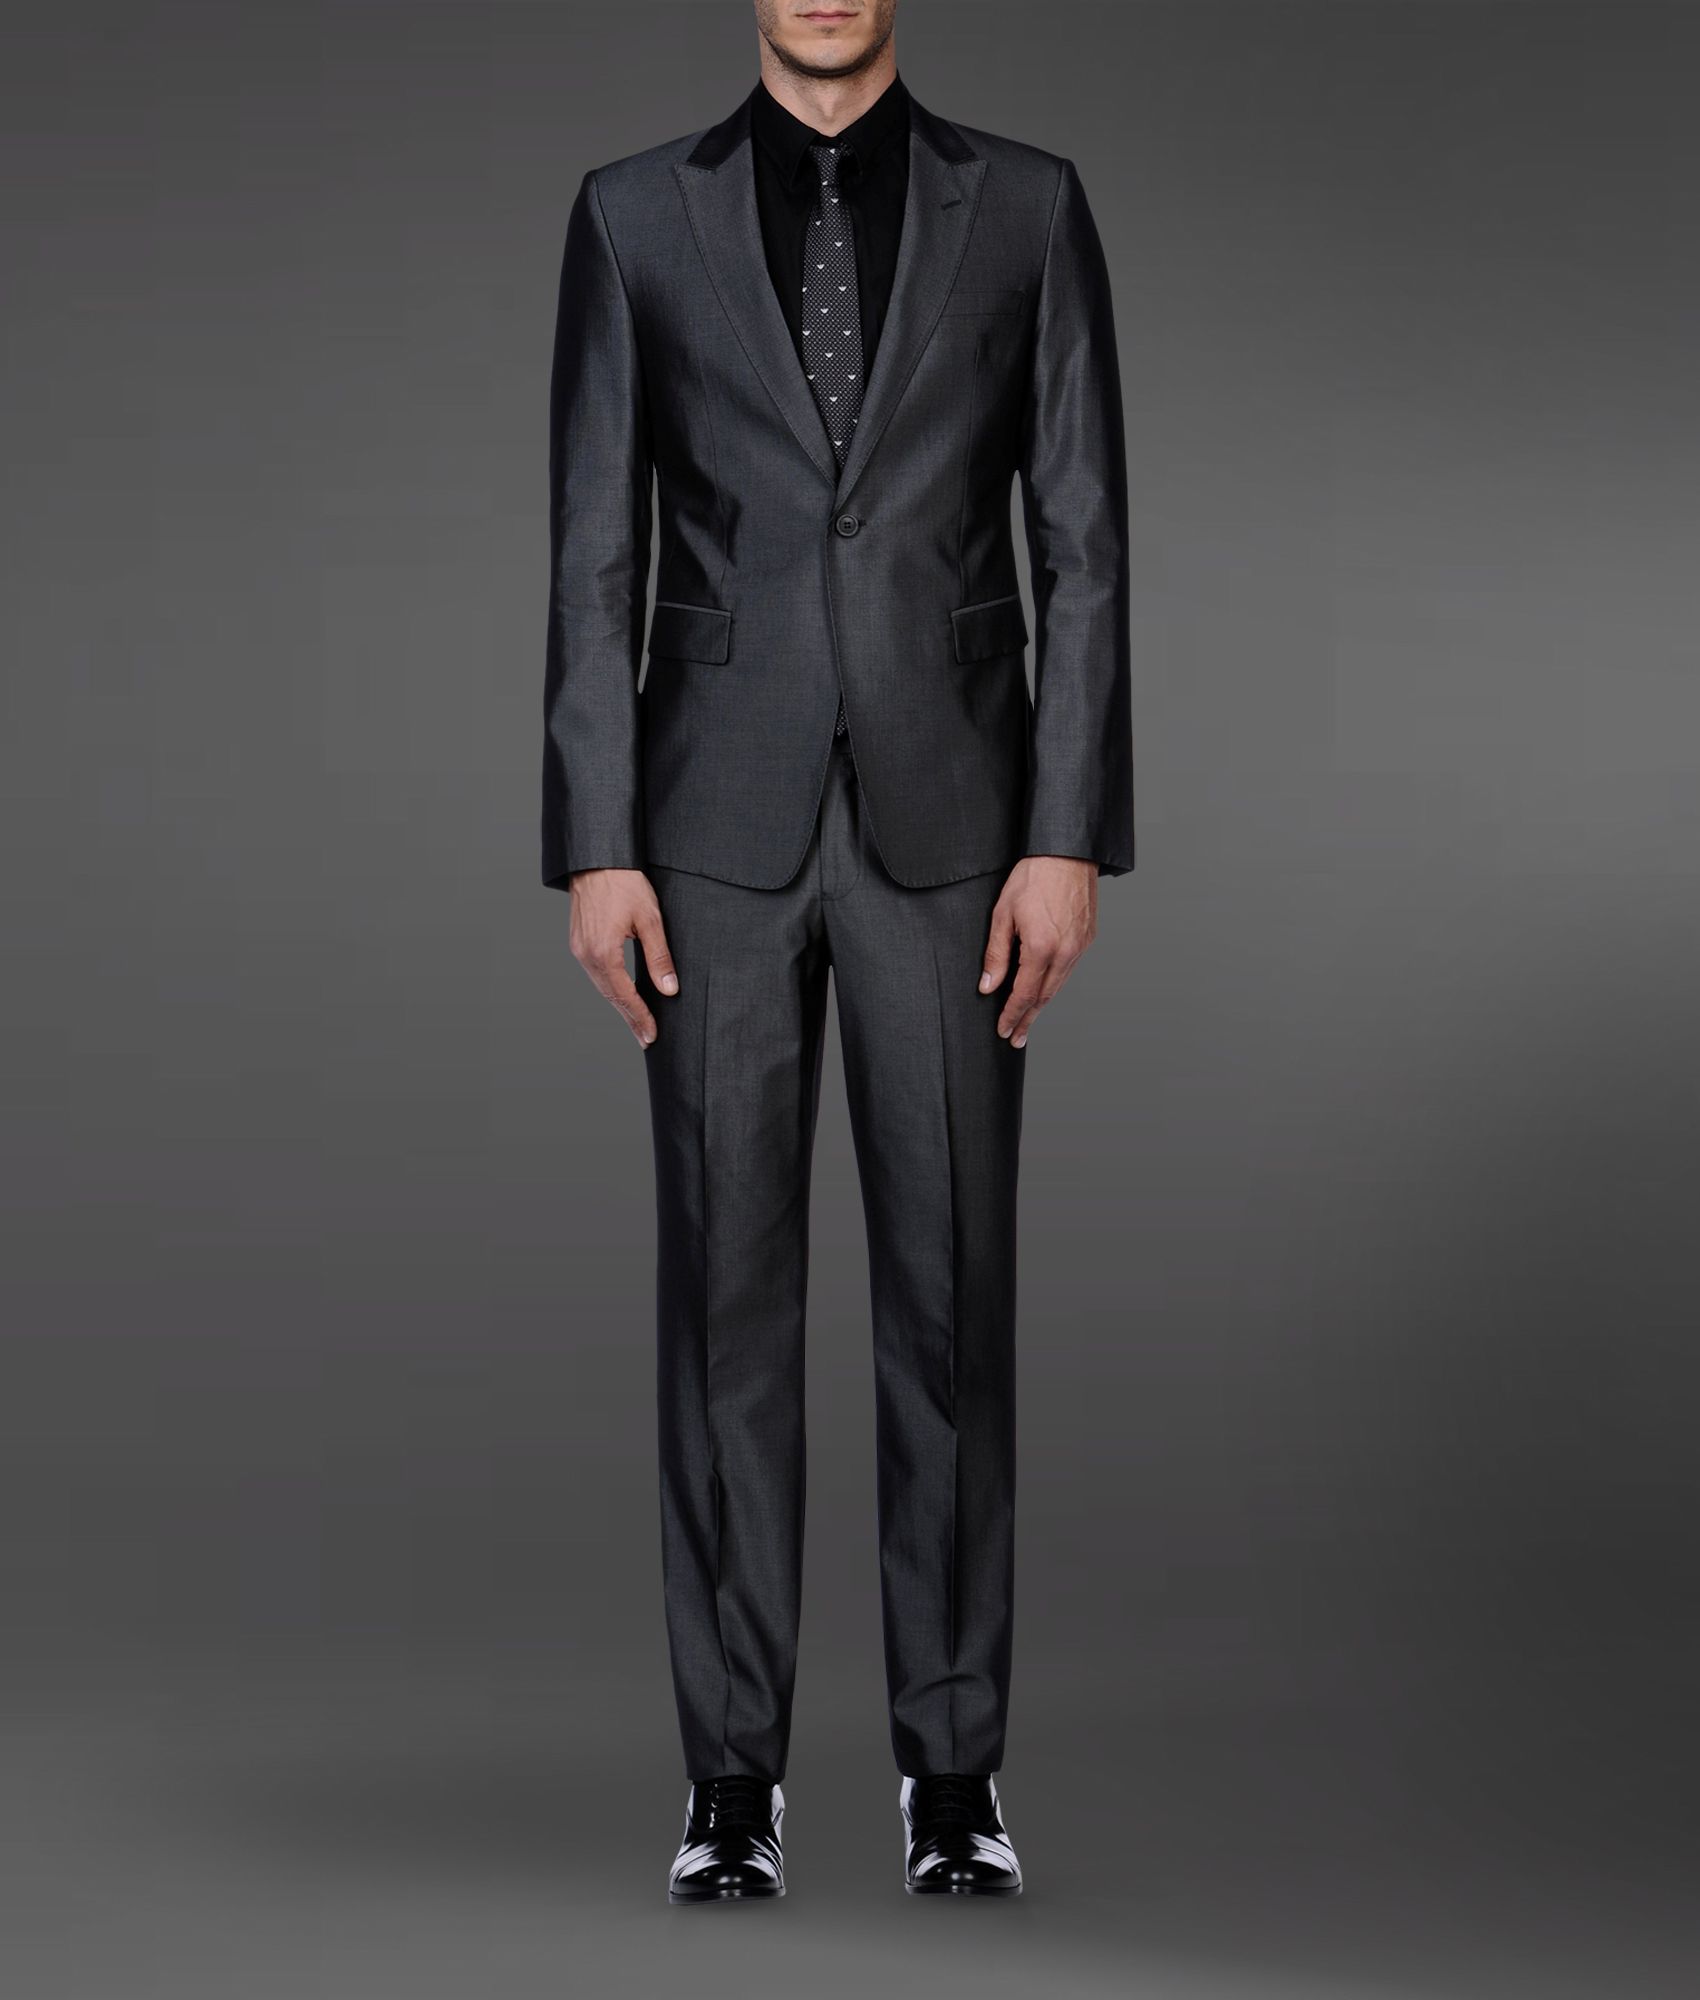 Lyst - Emporio Armani One Button Suit in Gray for Men